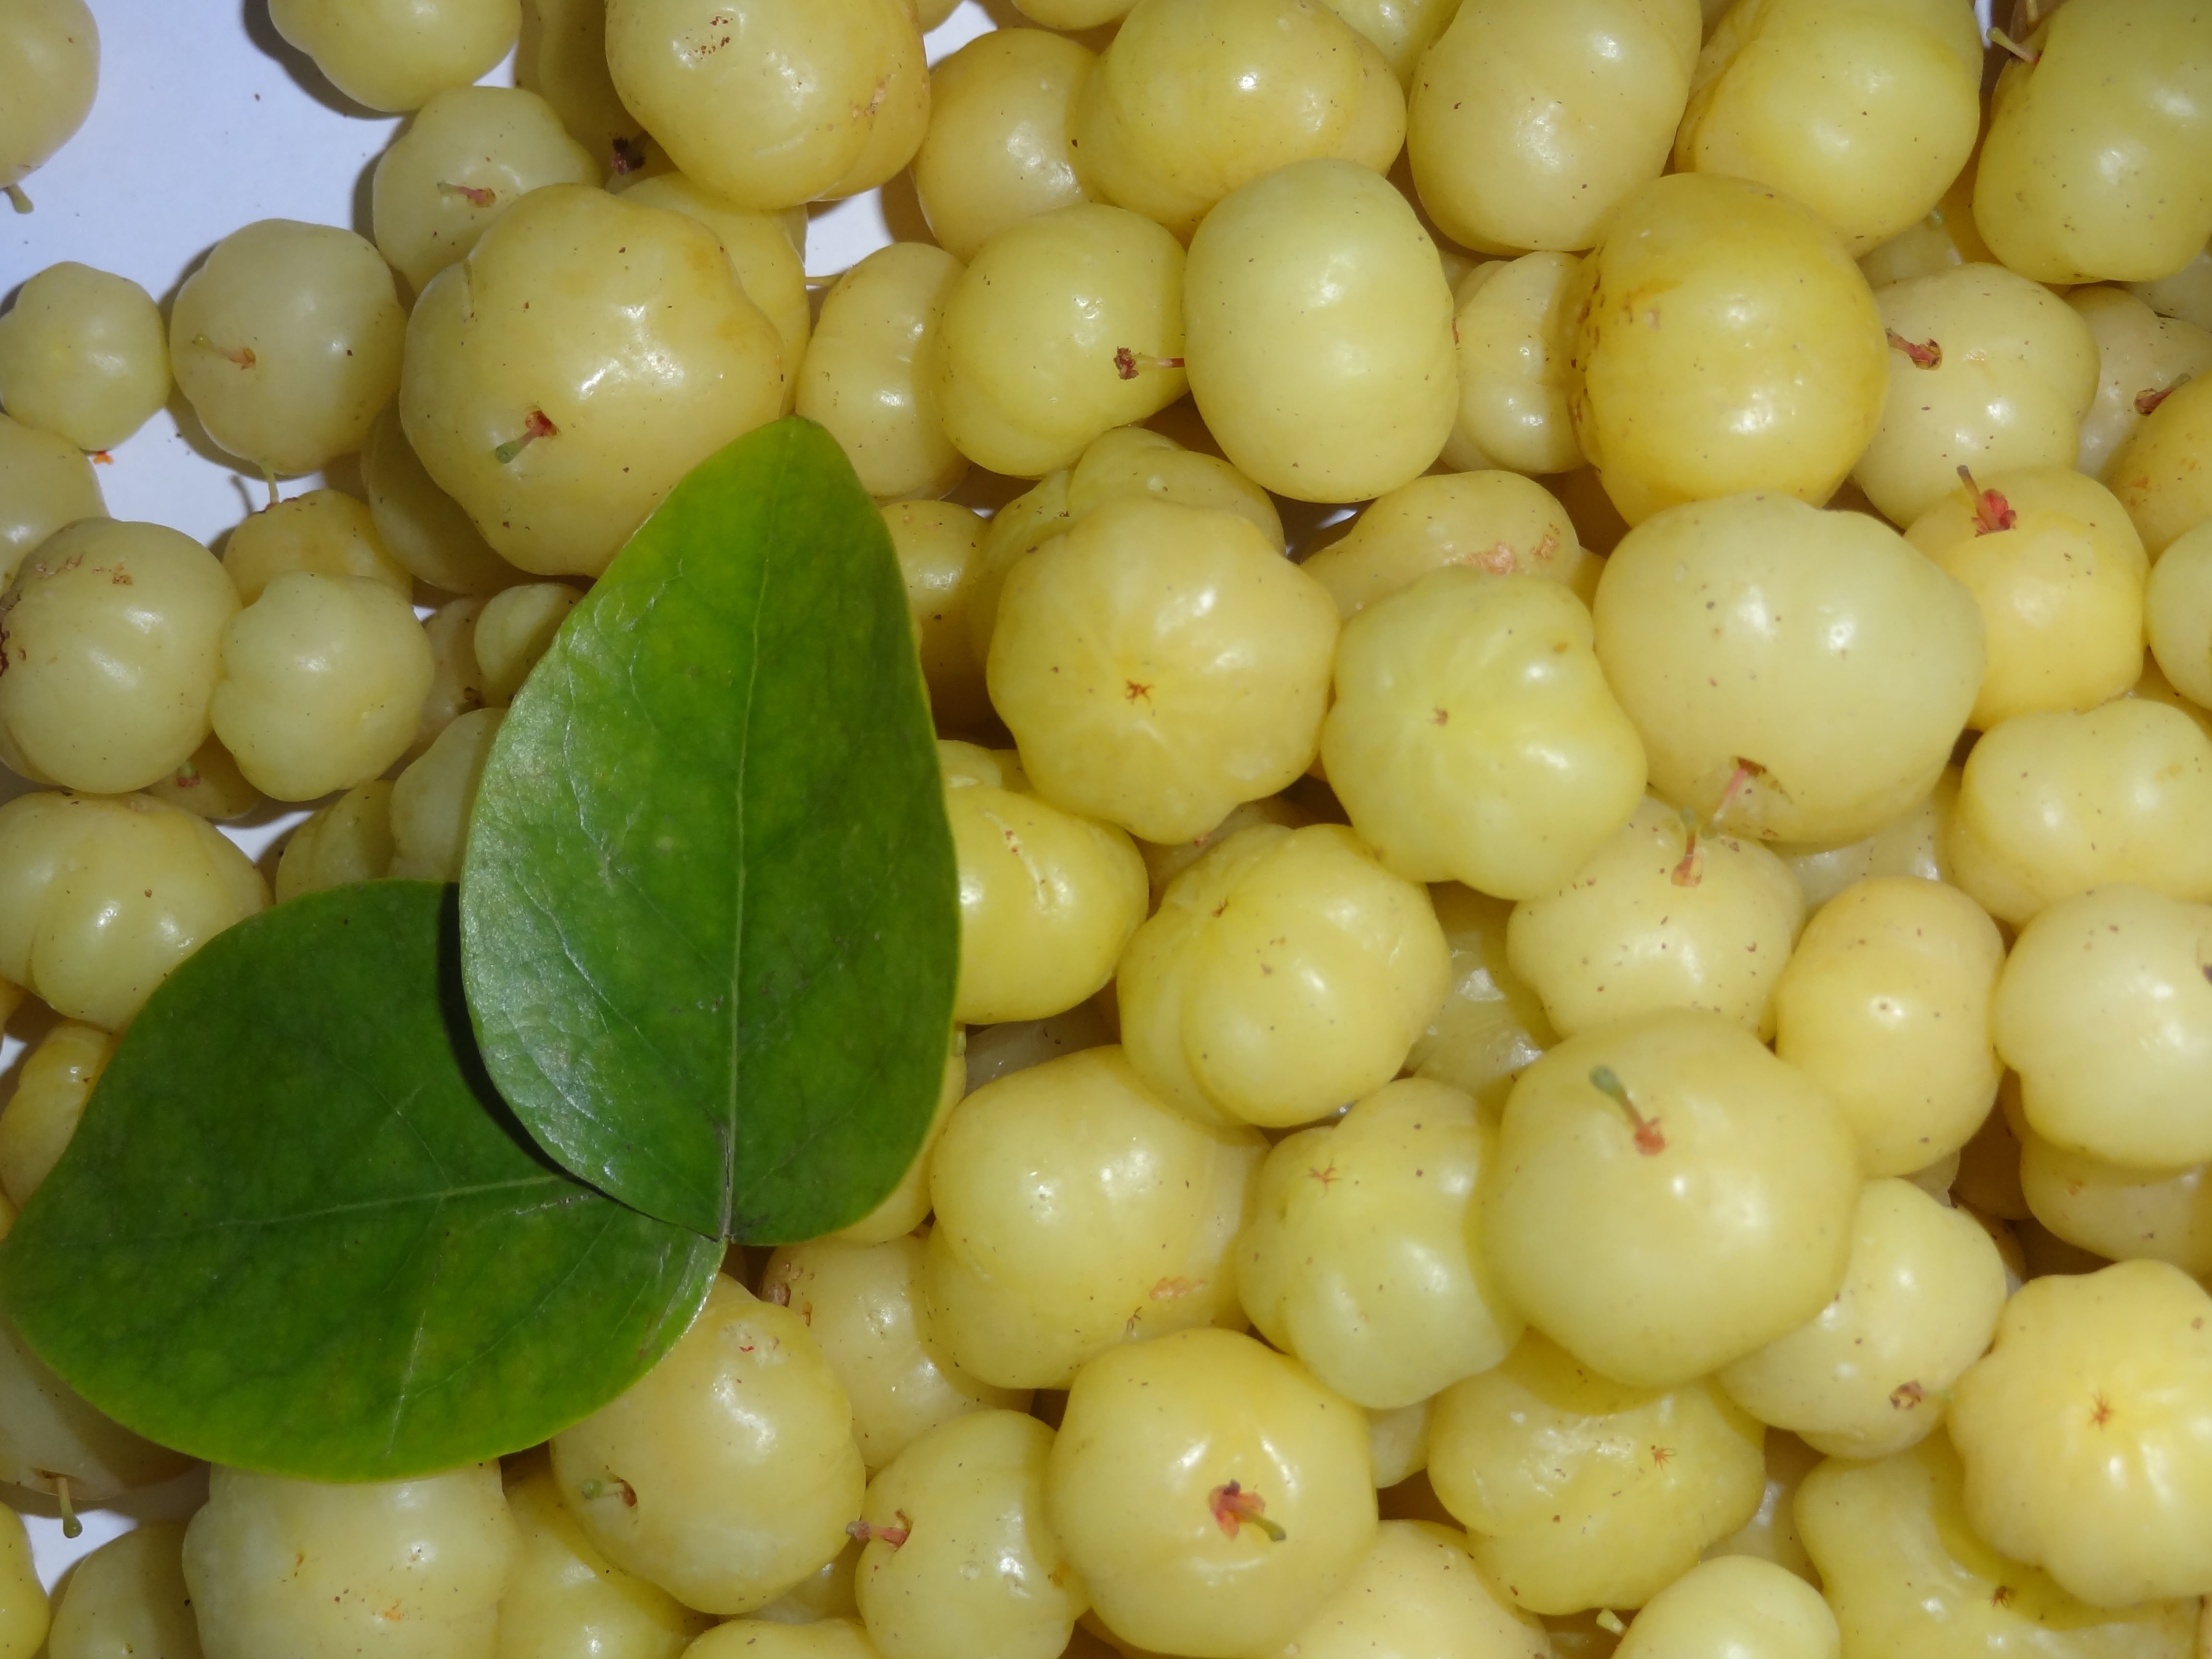 round yellow fruits beside two green leaves, goose berries, amla